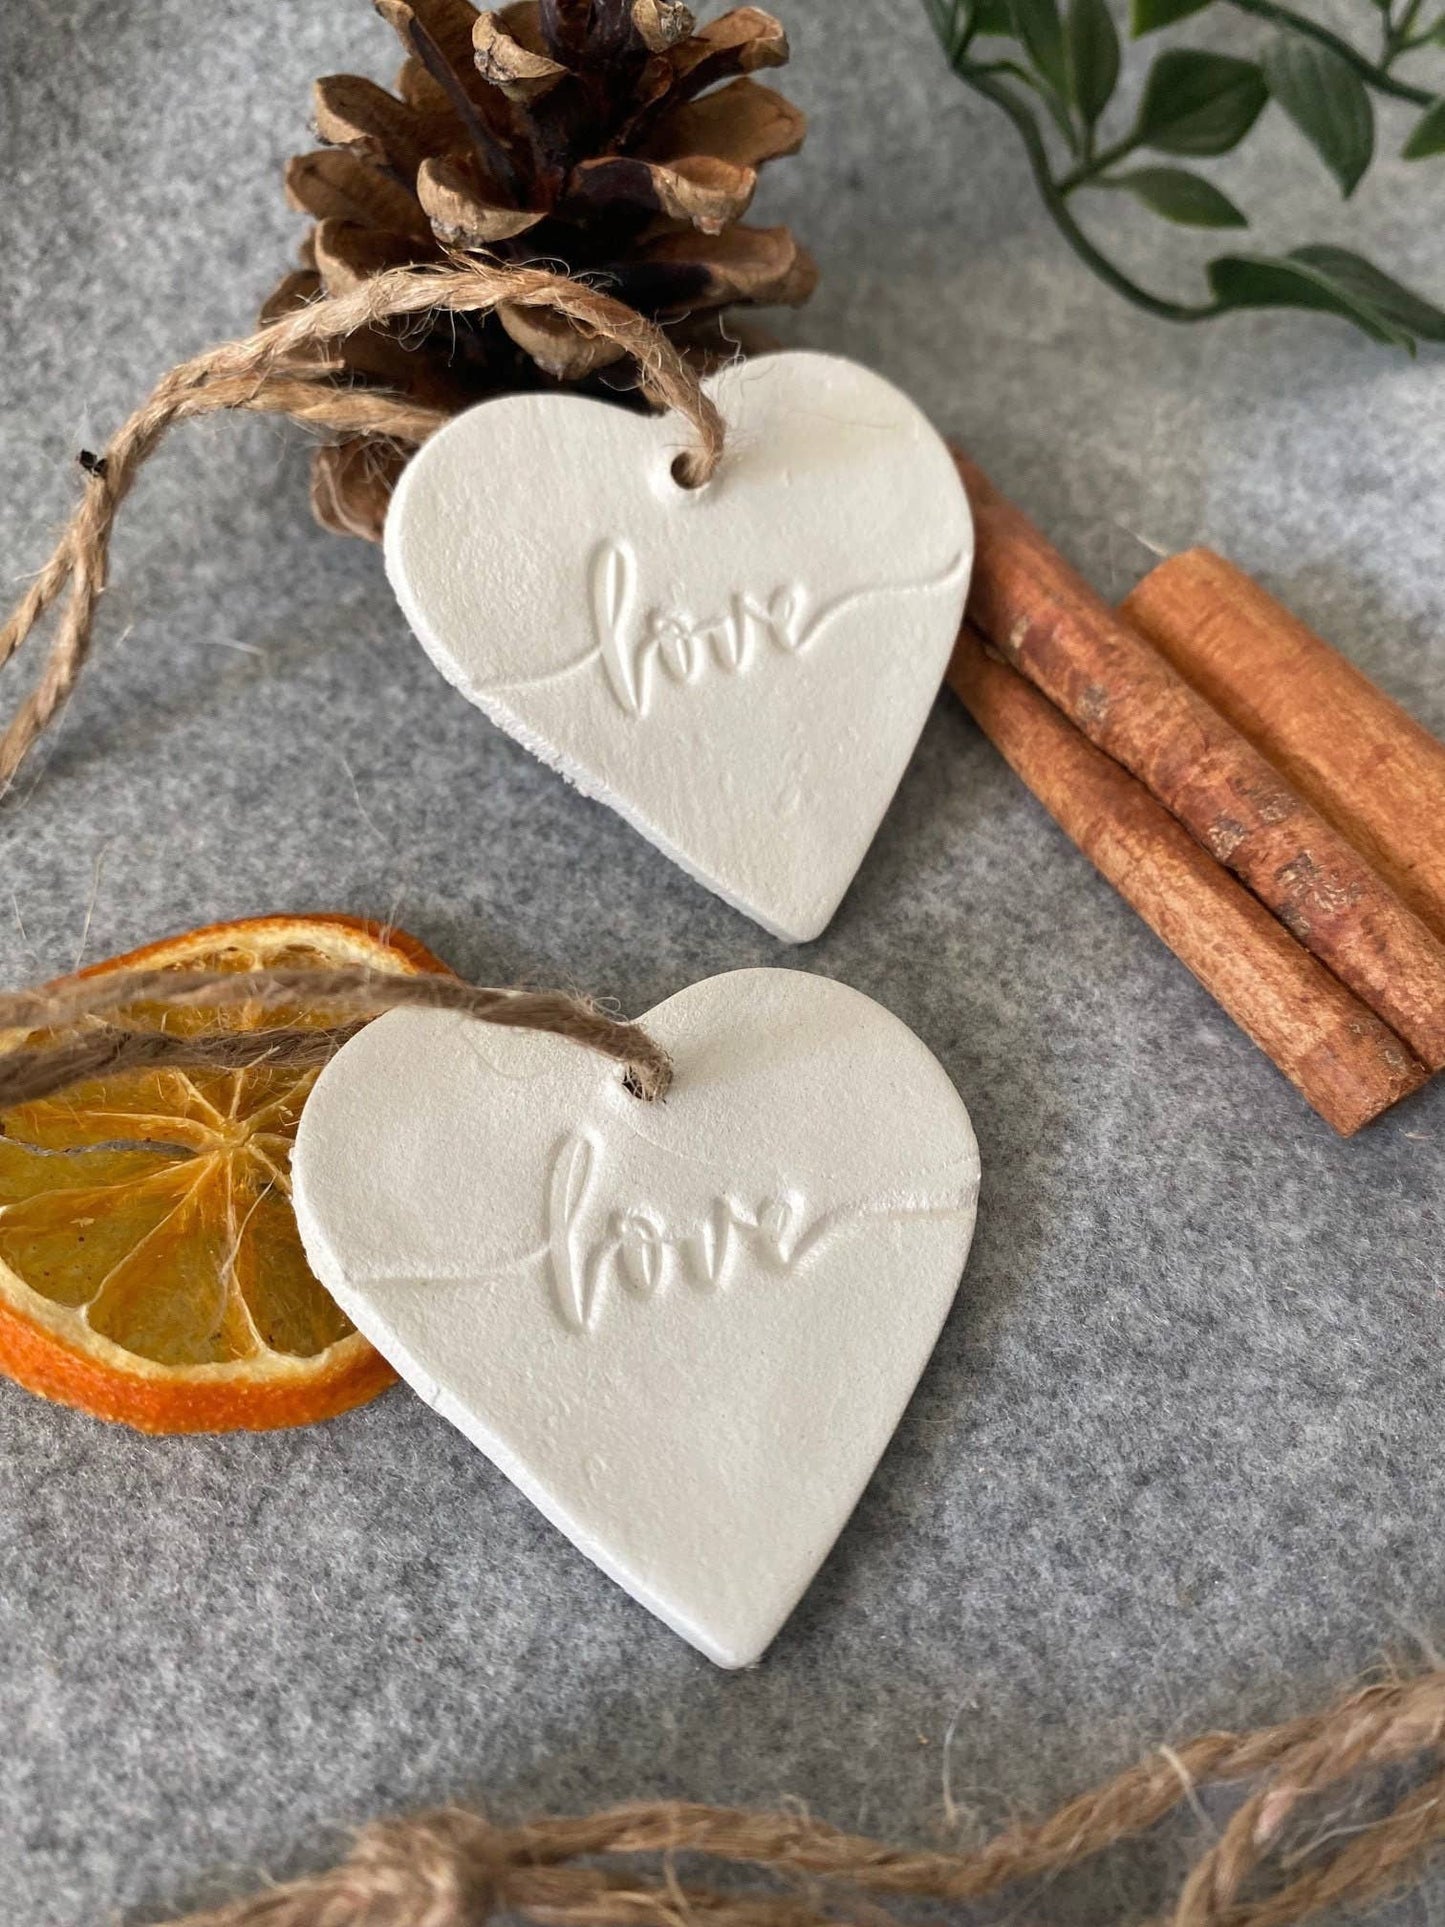 Small “love” Heart White Clay Decoration Ornaments one pack of 5